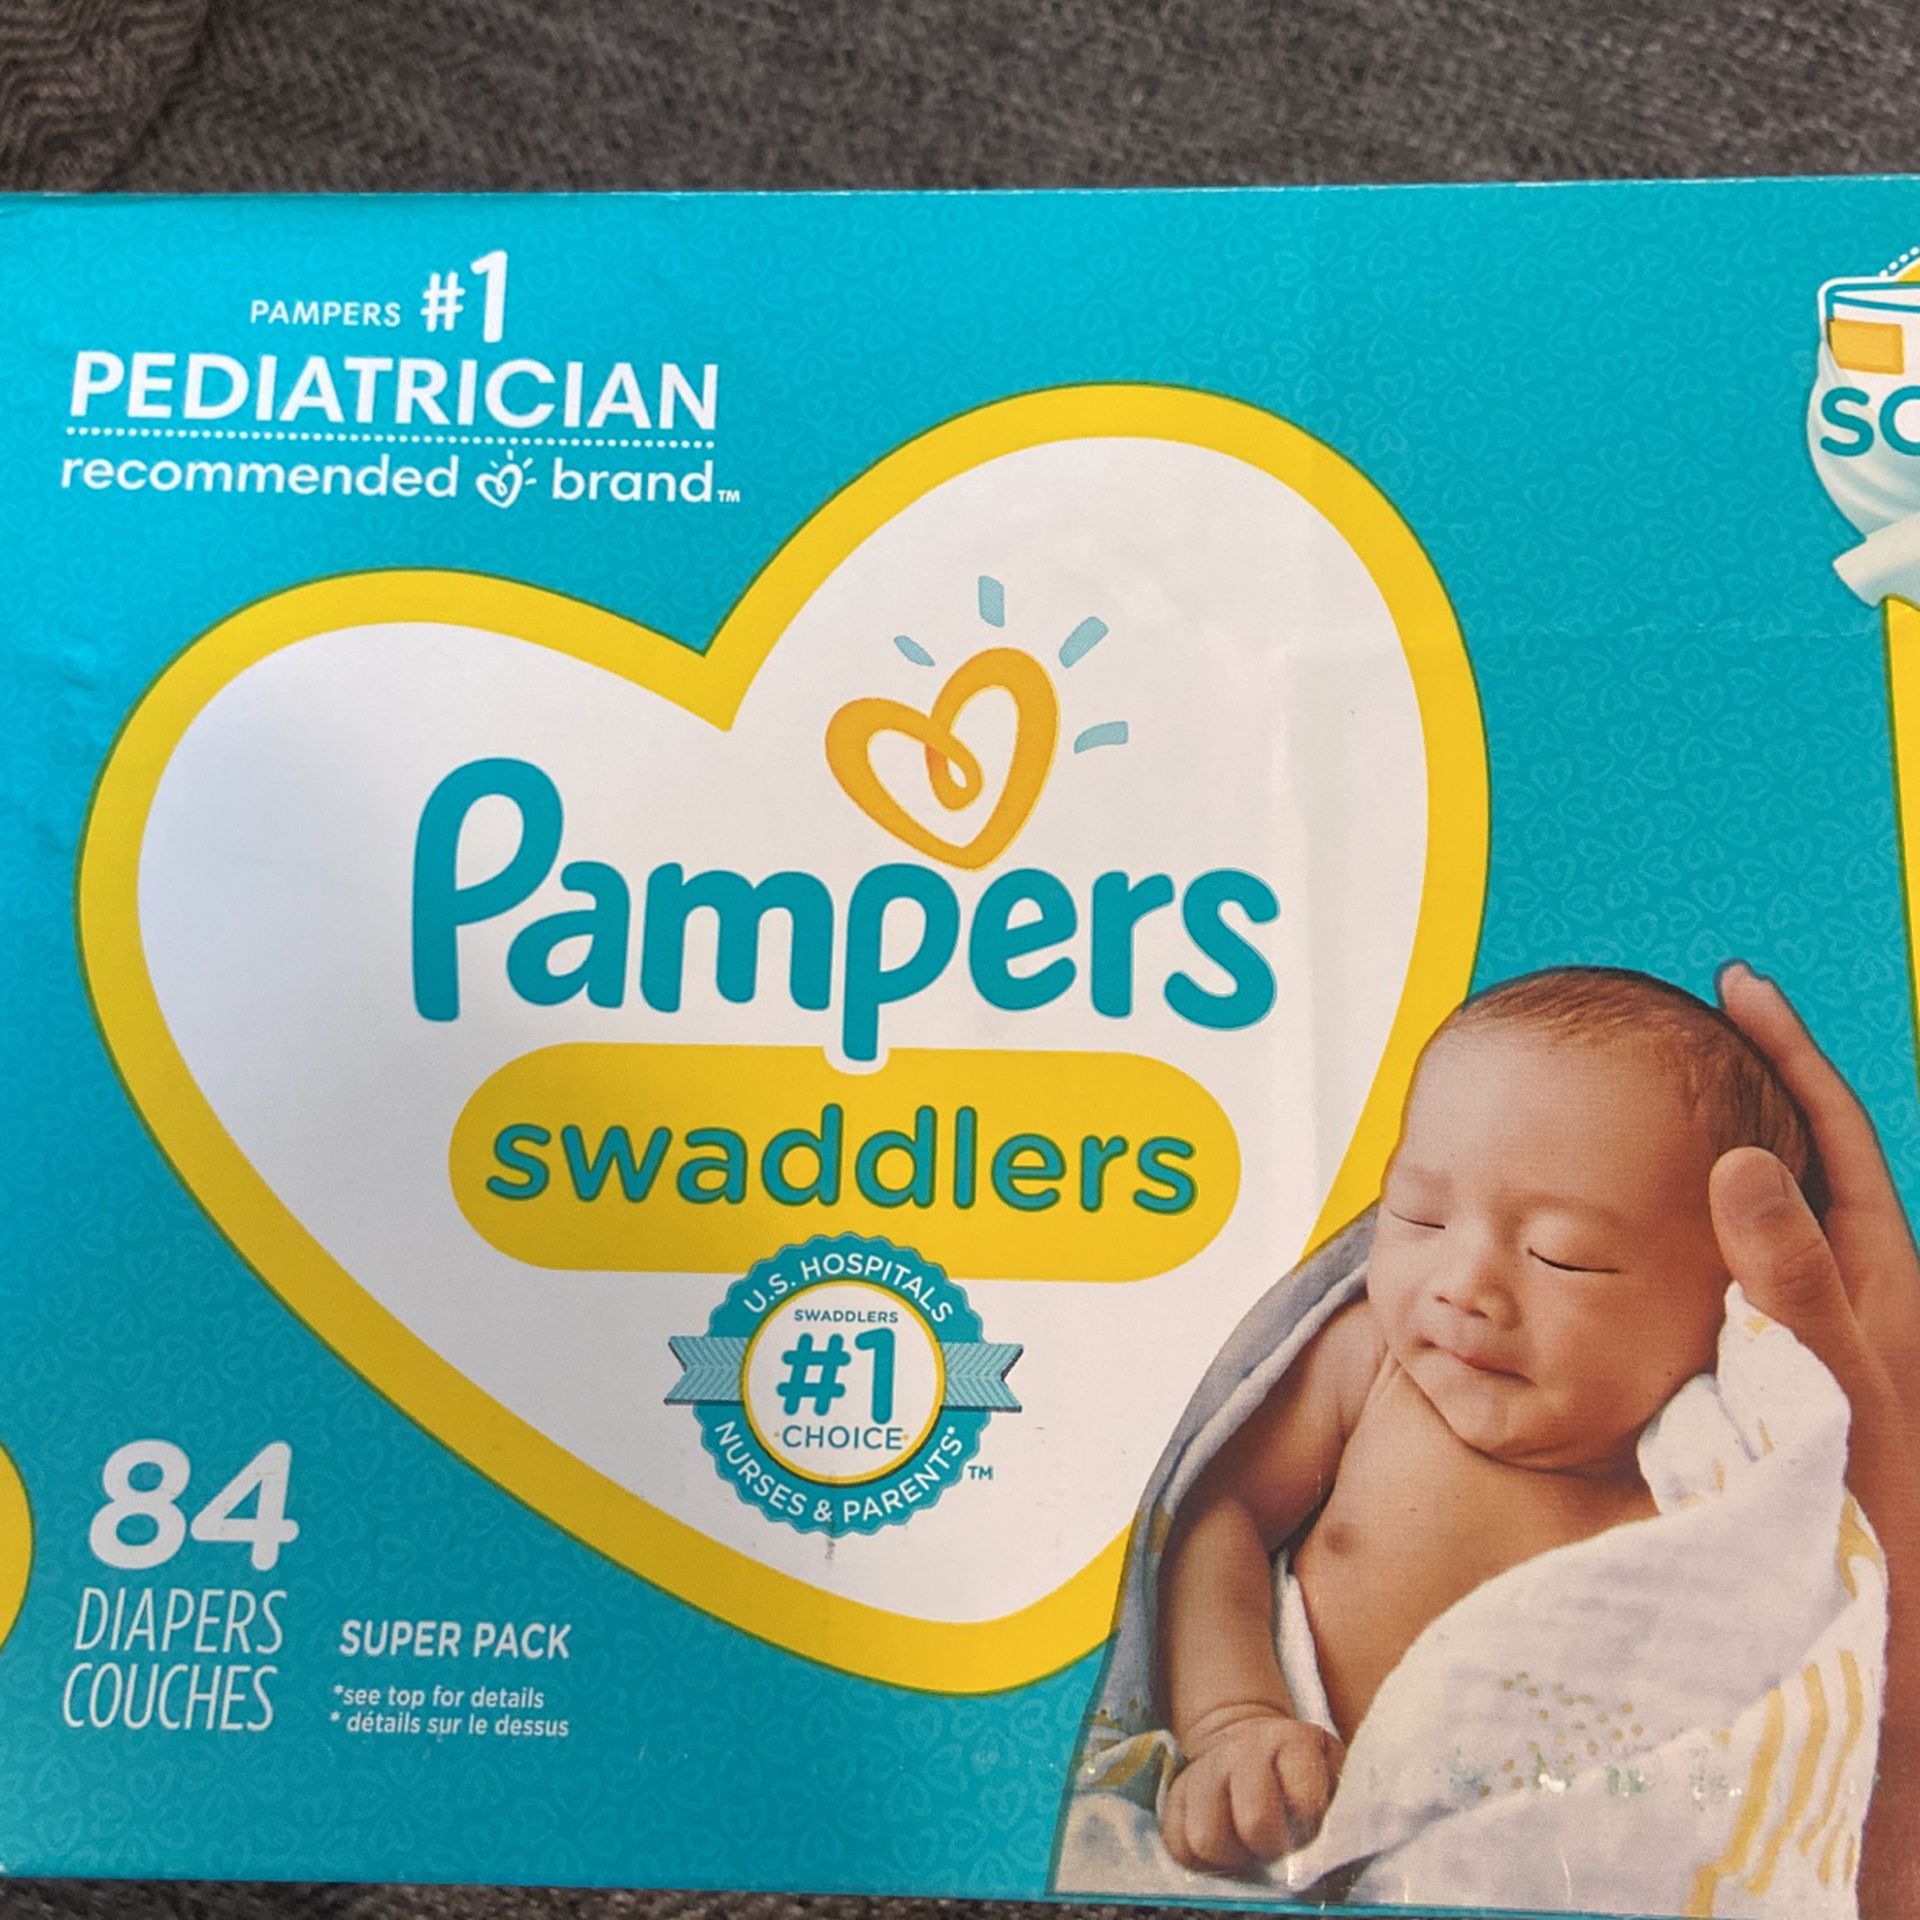 NEWBORN PAMPERS BRAND DIAPERS 